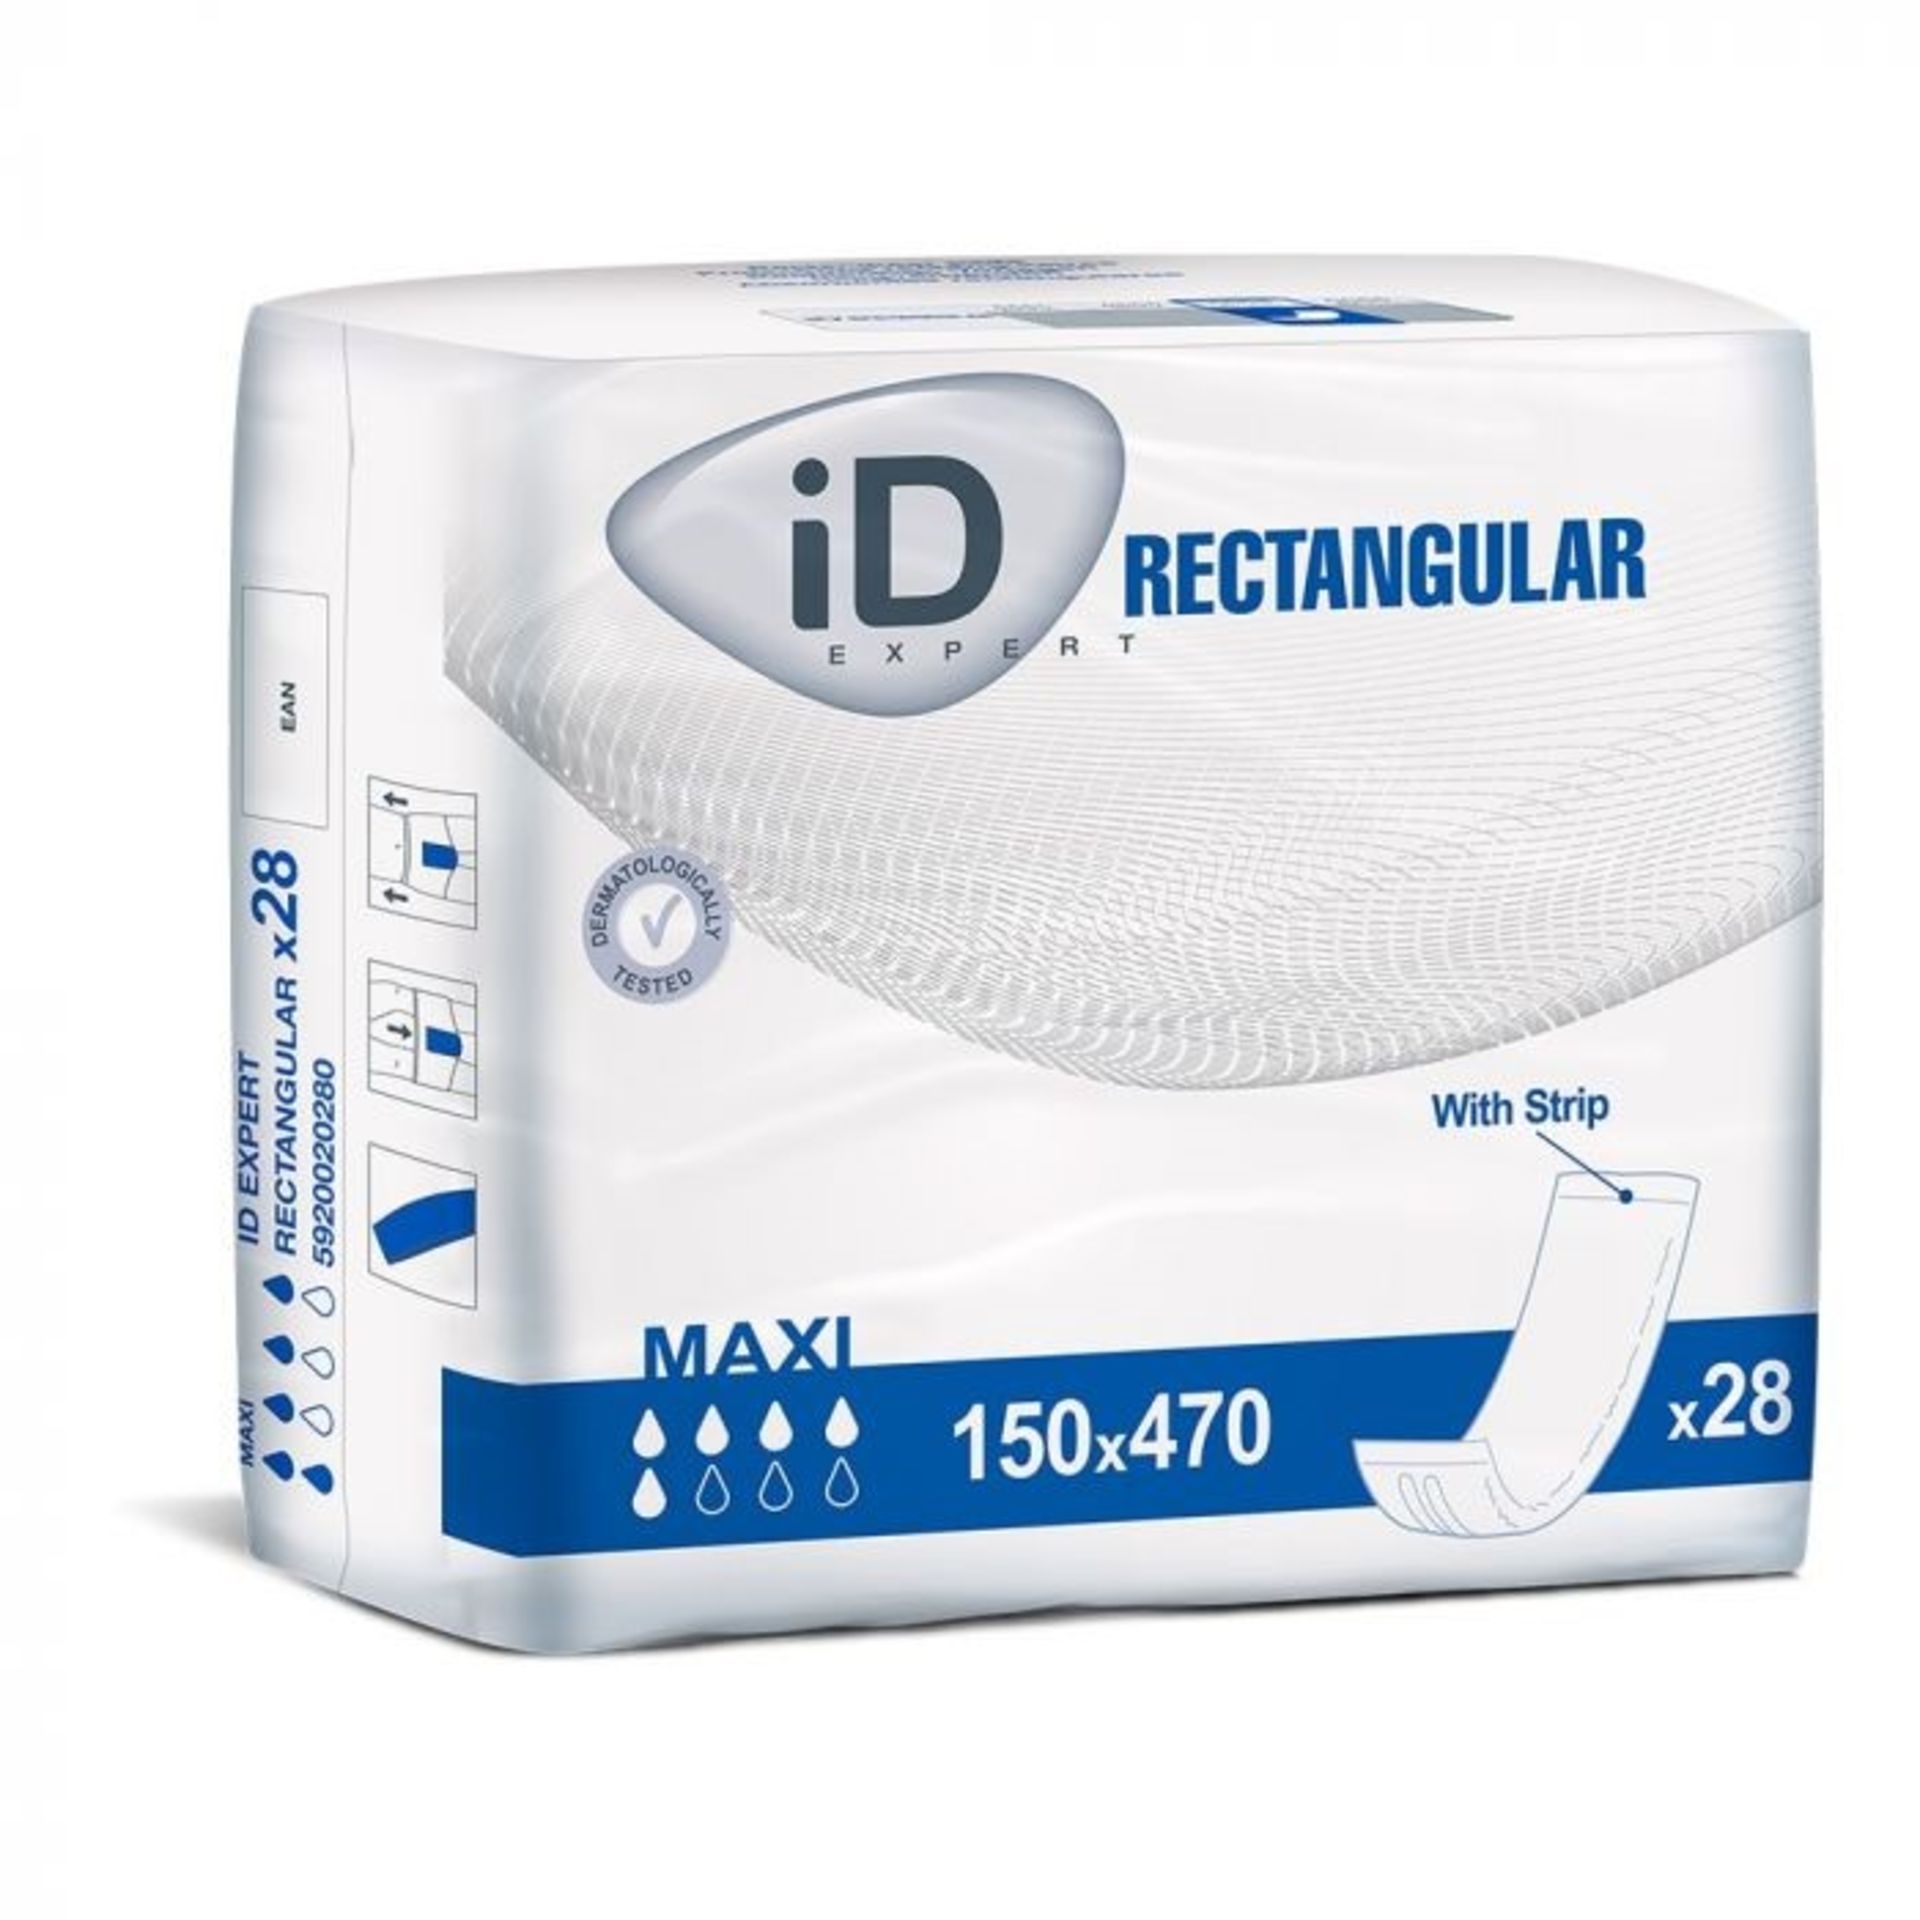 ME : 1 LOT TO CONTAIN 4 PACKS OF ID EXPERT RECTANGULAR PE BACKED MAXI PADS - 150 X 470 / EACH PACK